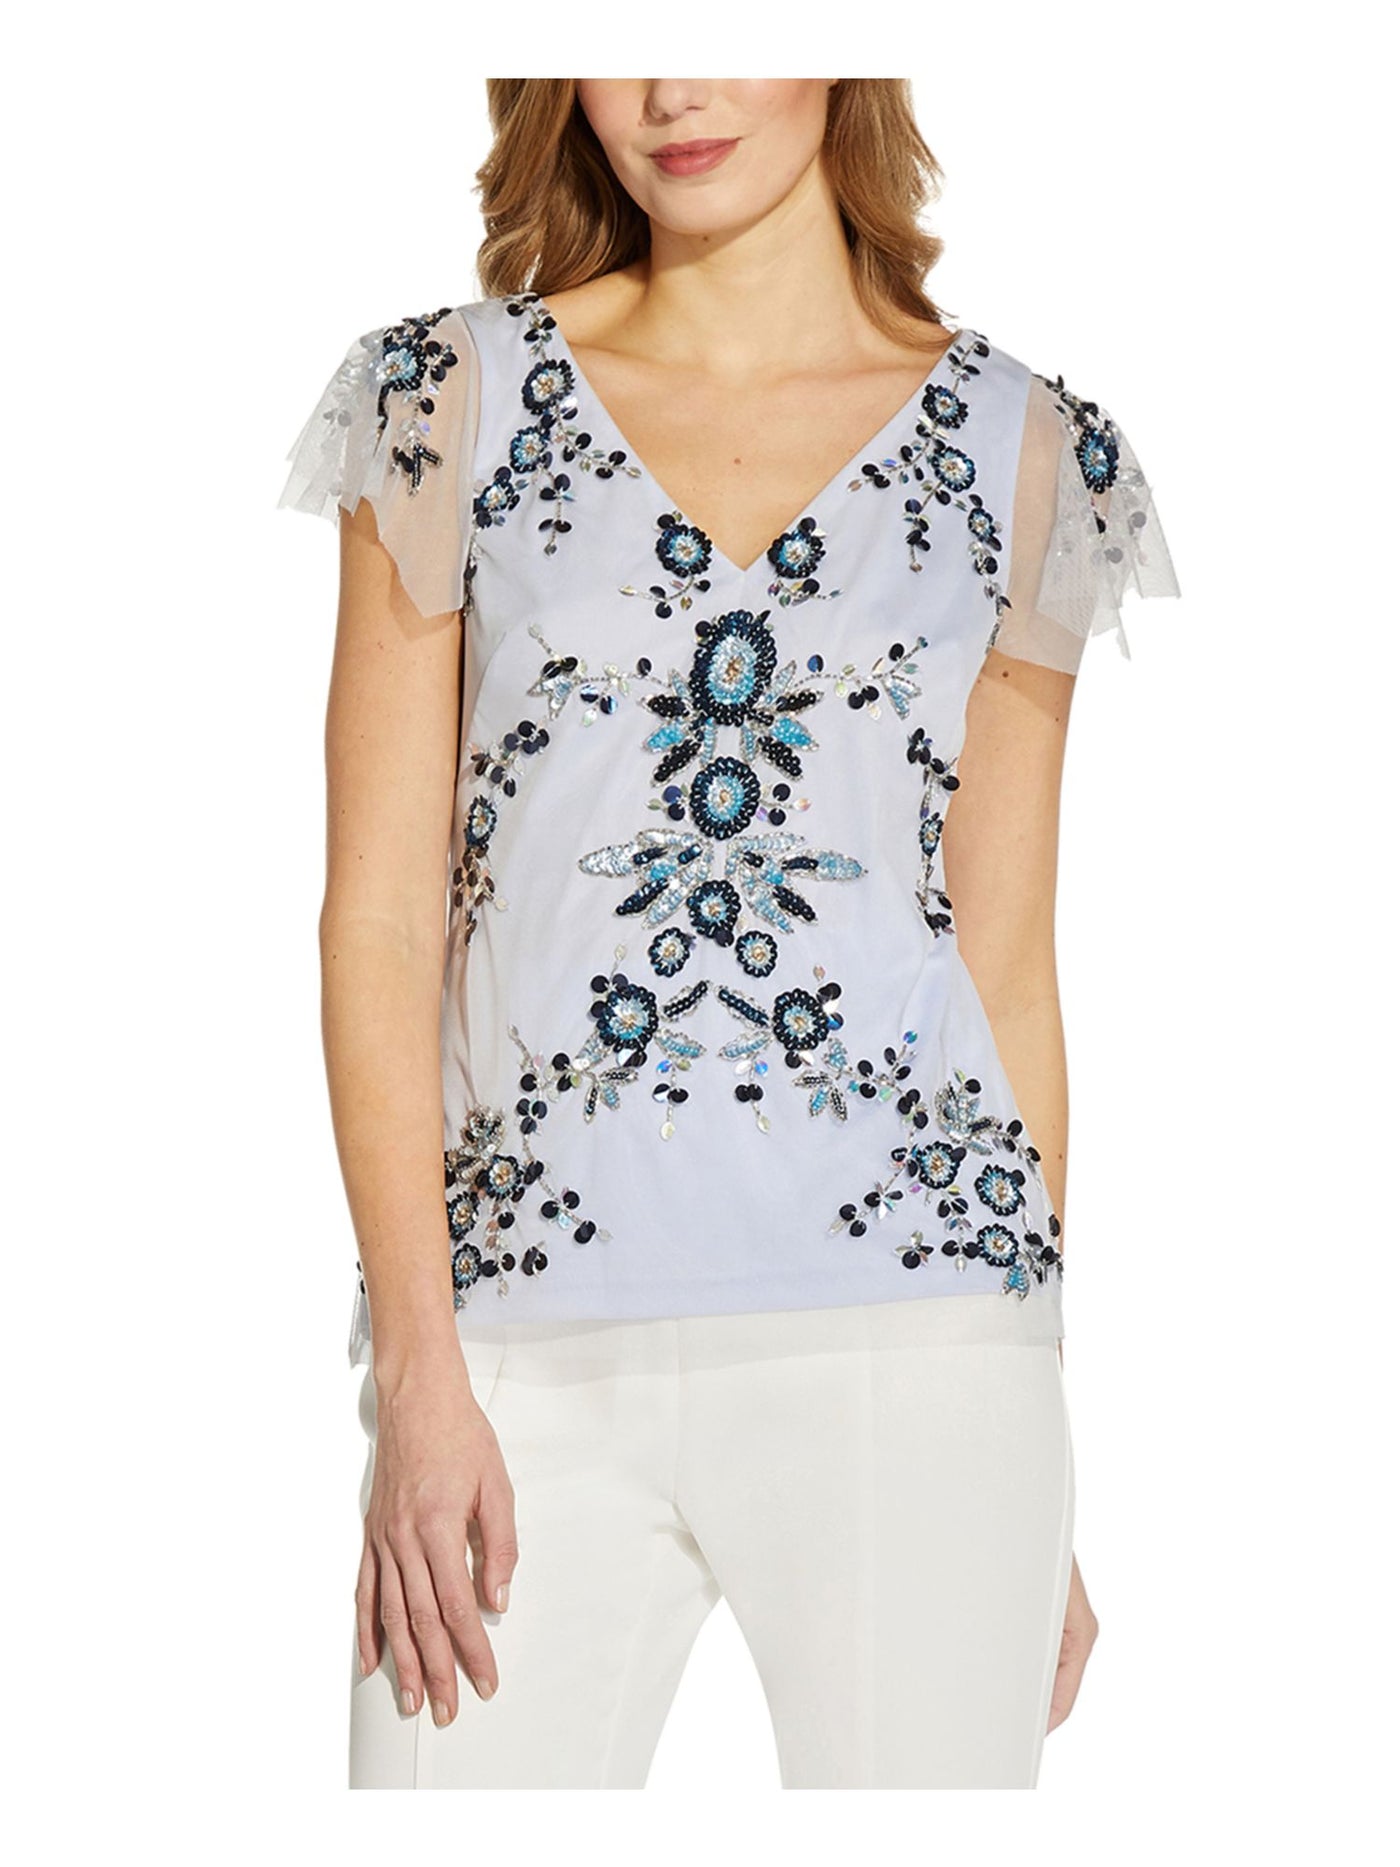 ADRIANNA PAPELL Womens Light Blue Embellished Sequined Zippered Lined Mesh Floral Flutter Sleeve V Neck Wear To Work Top 8